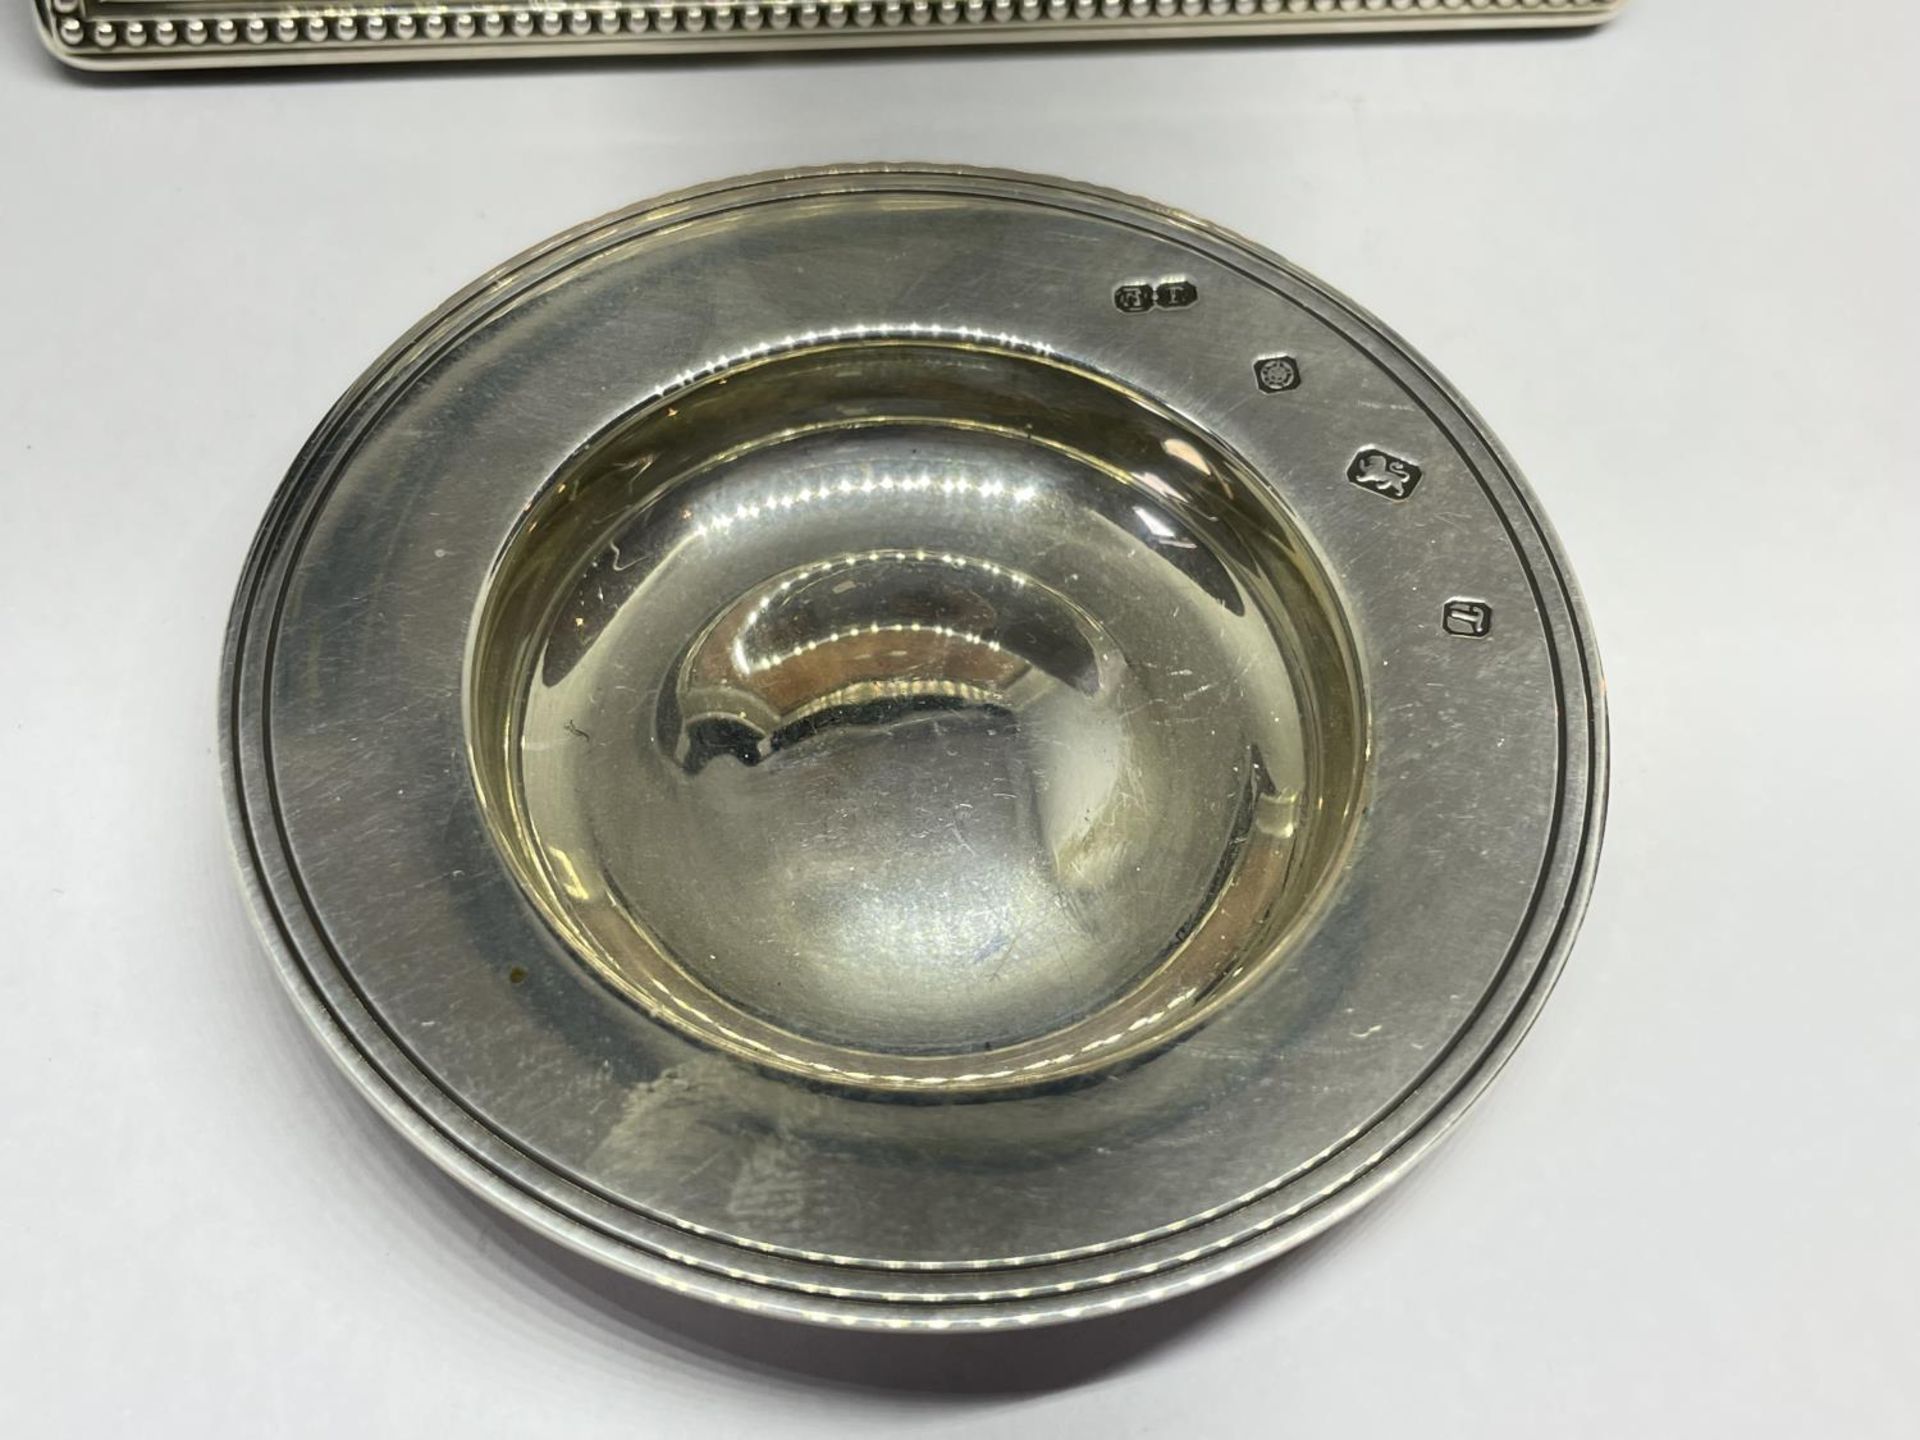 A HALLMARKED SHEFFIELD PIN DISH GROSS WEIGHT 40.5 GRAMS AND A MARKED 925 SILVER PHOTOGRAPH FRAME - Image 2 of 4